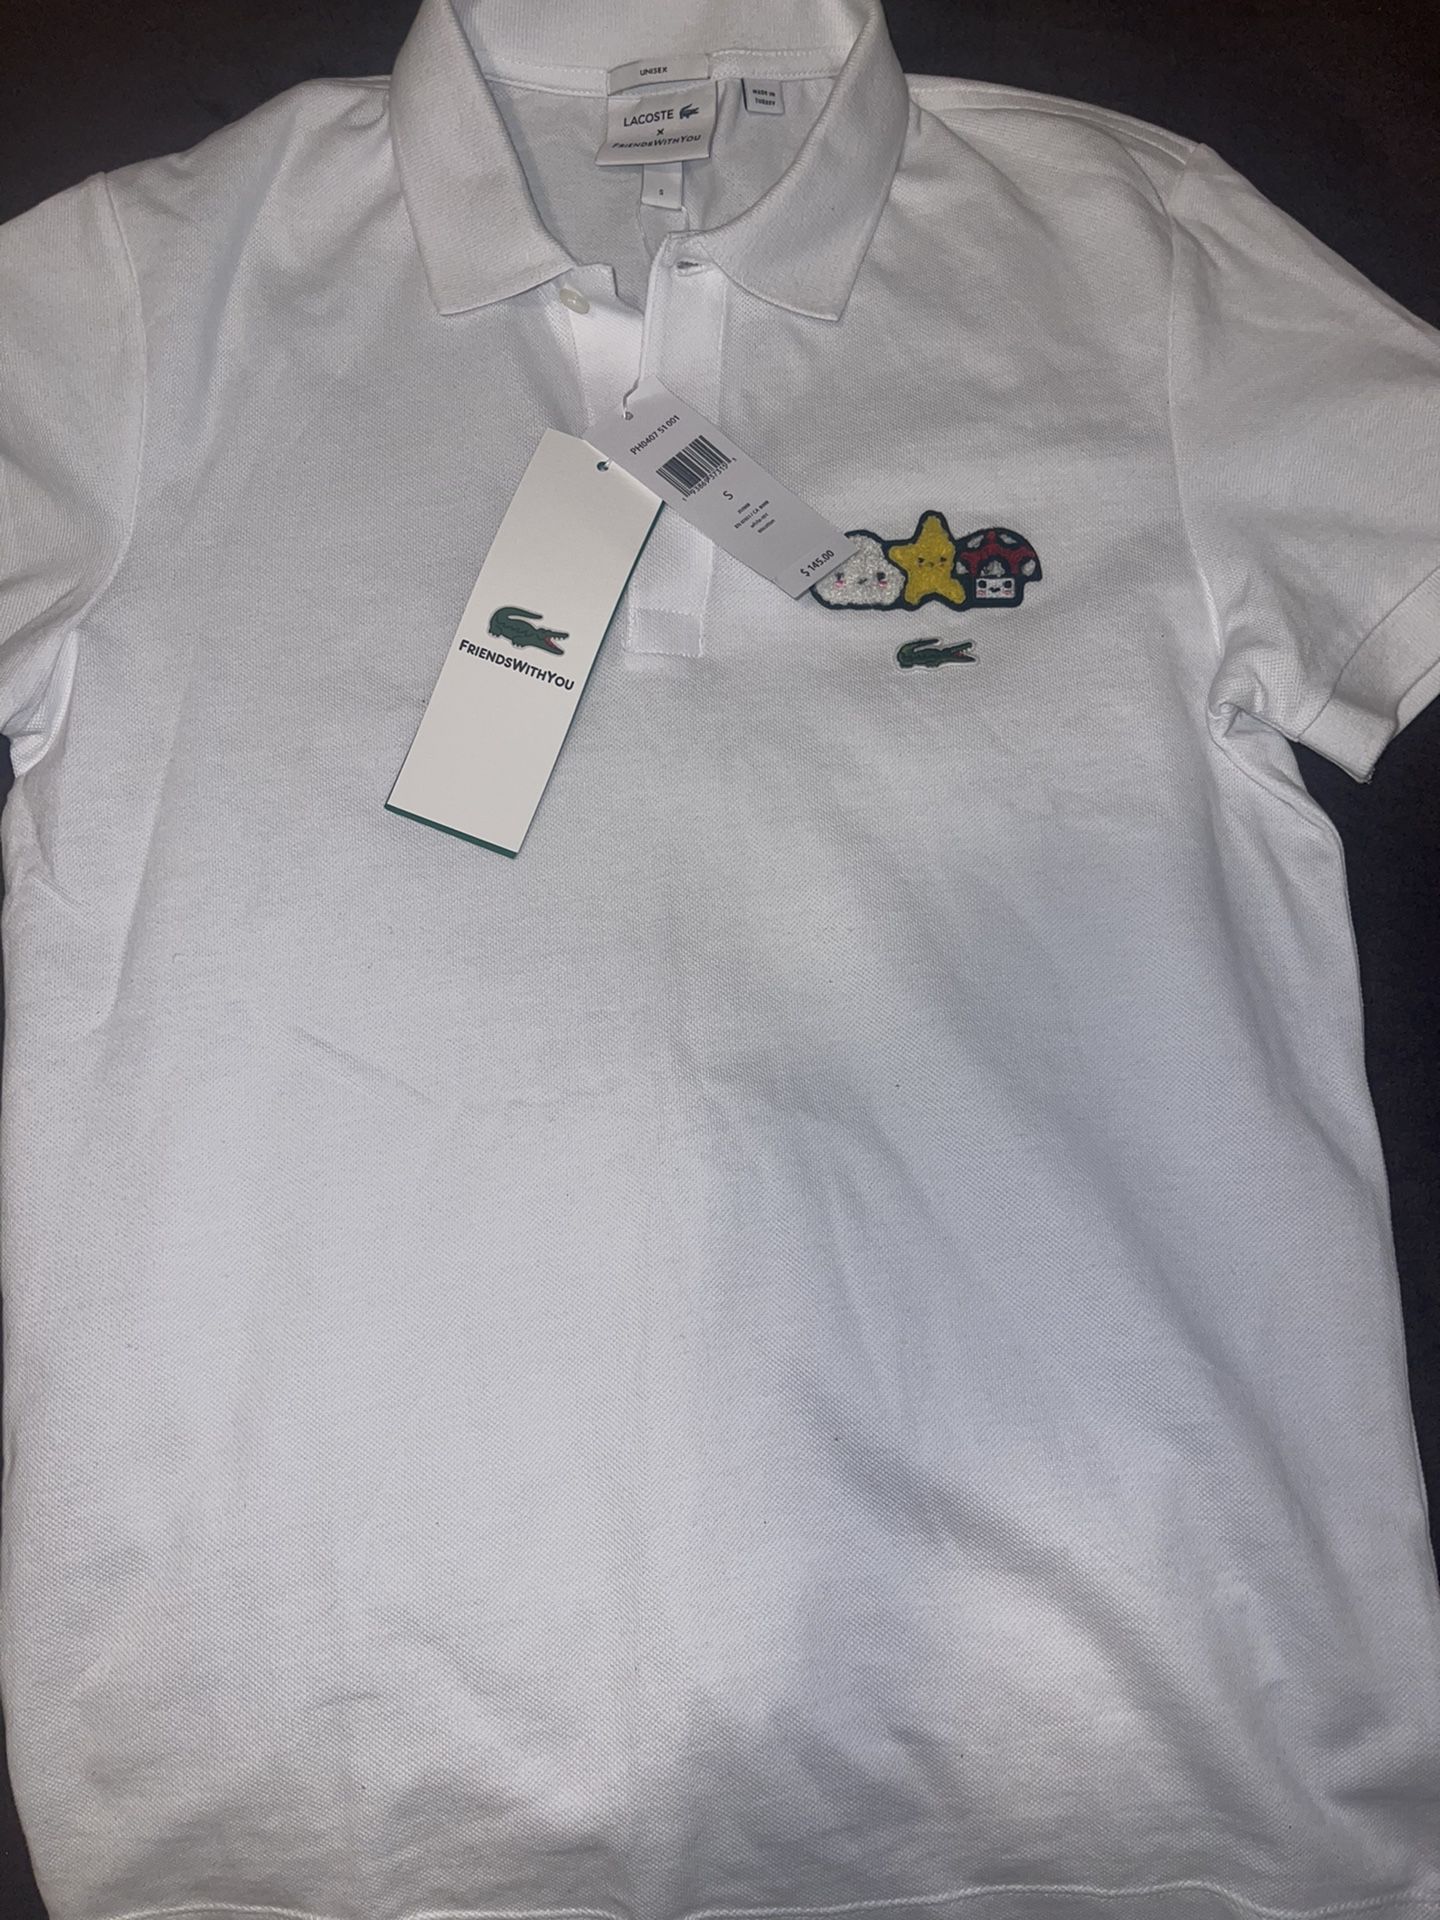 Men's Lacoste shirt for Sale in MD - OfferUp